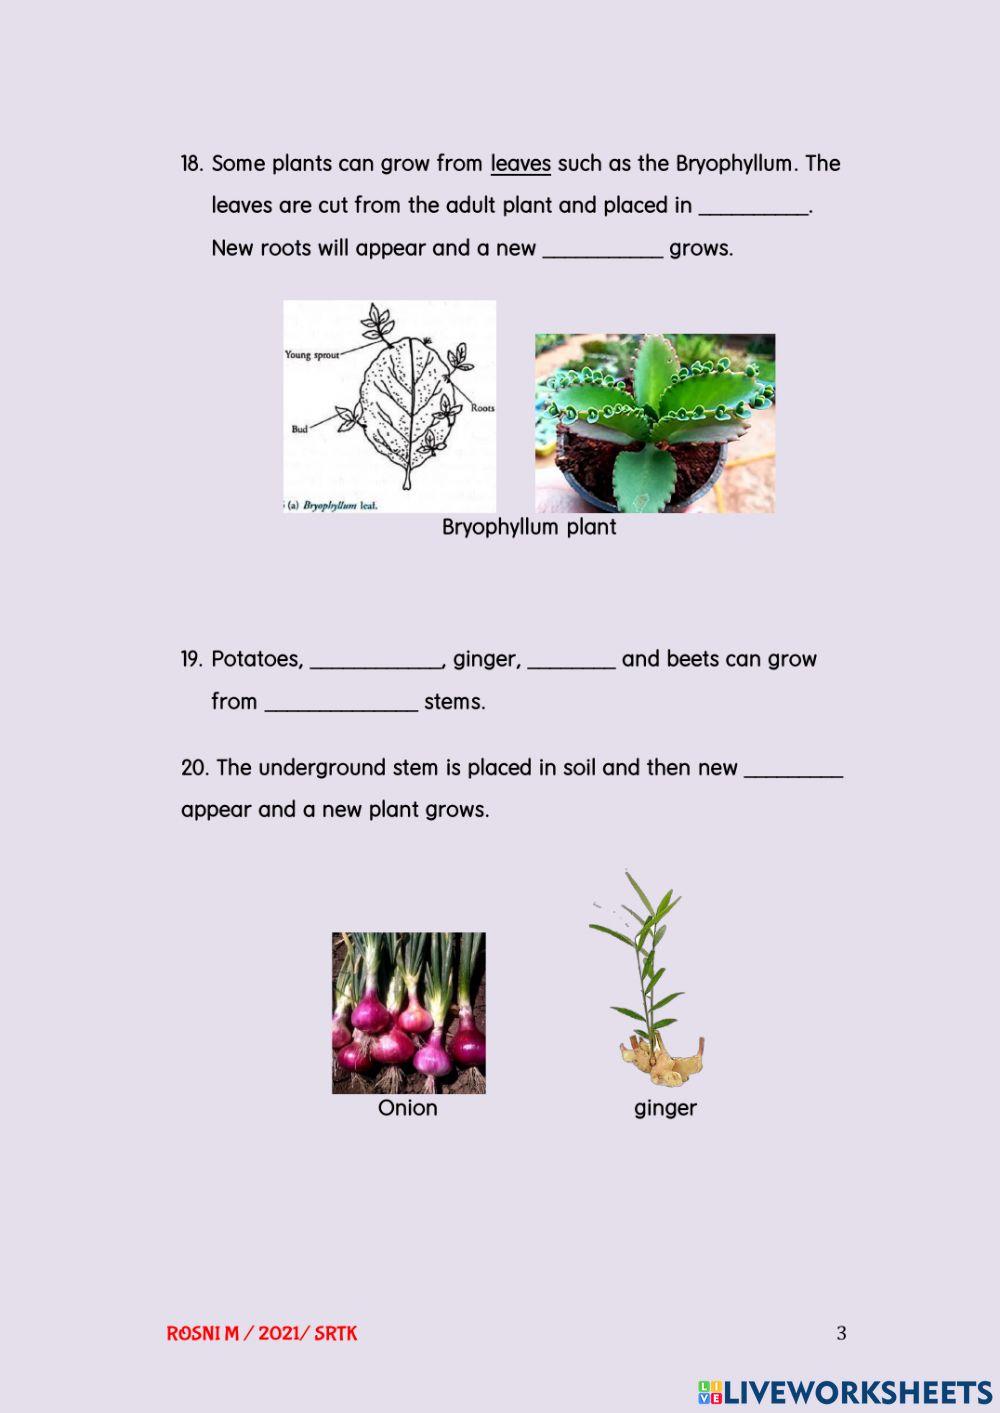 Plant life cycles